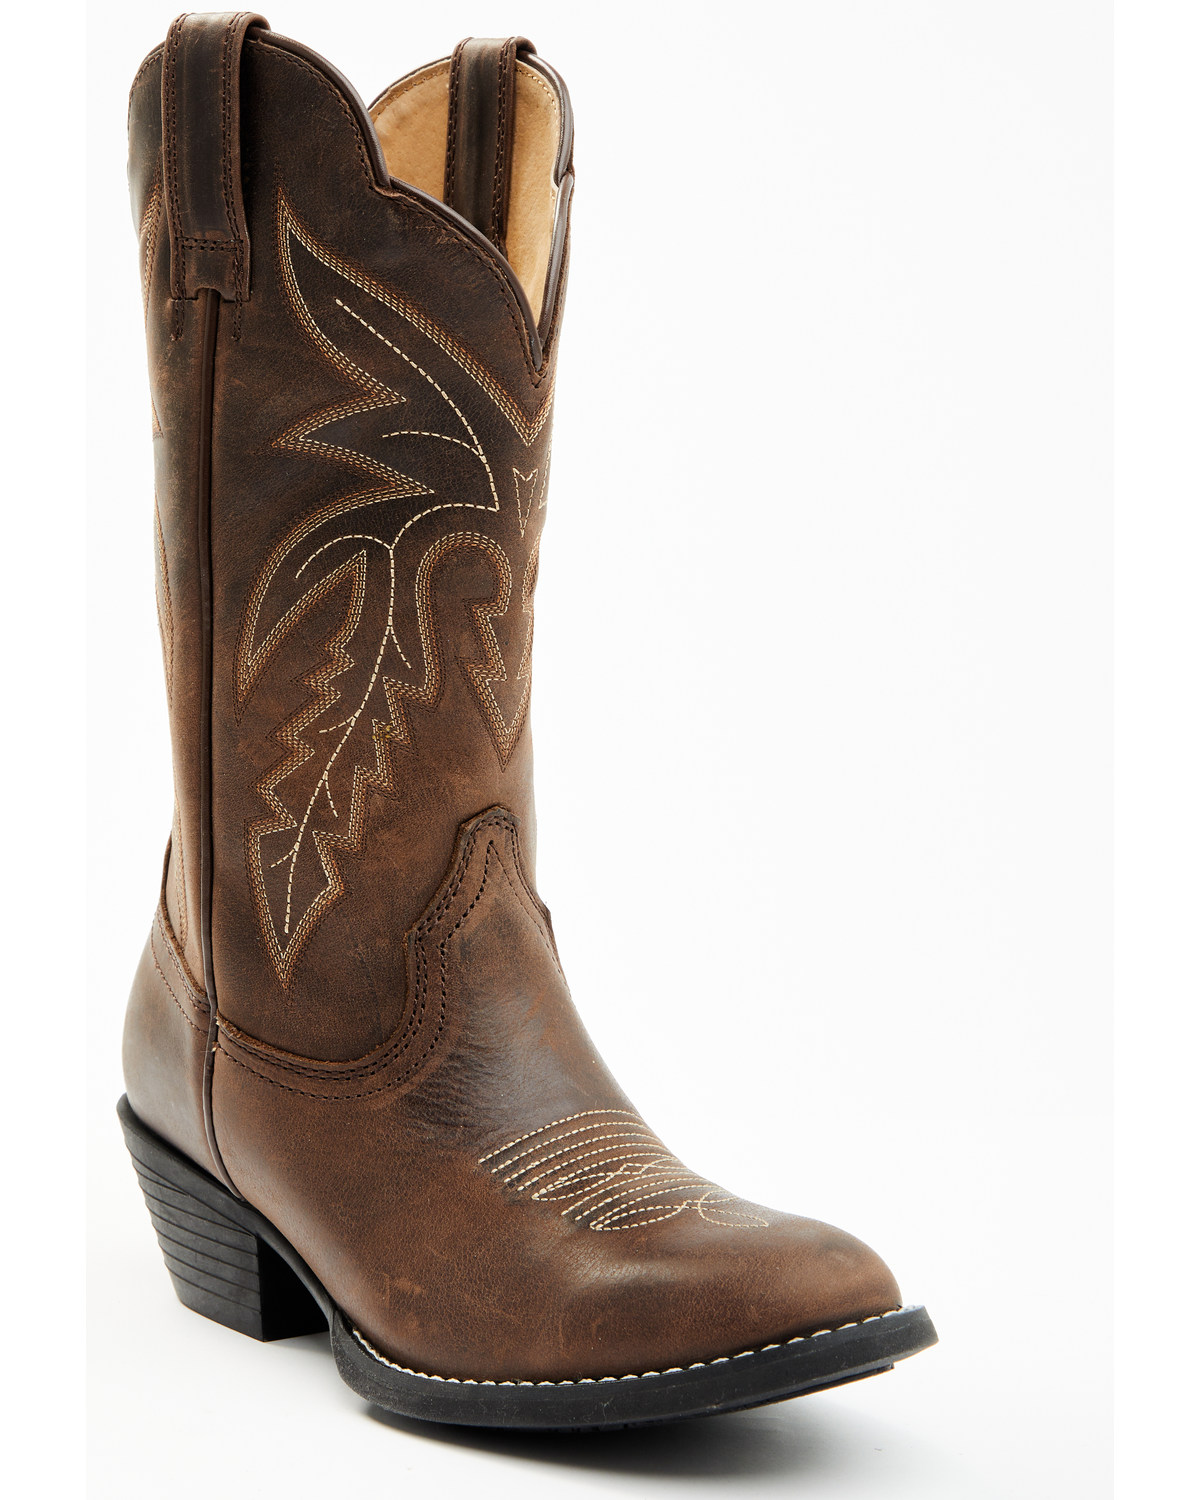 Shyanne Rival® Women's Western Boots - Round Toe